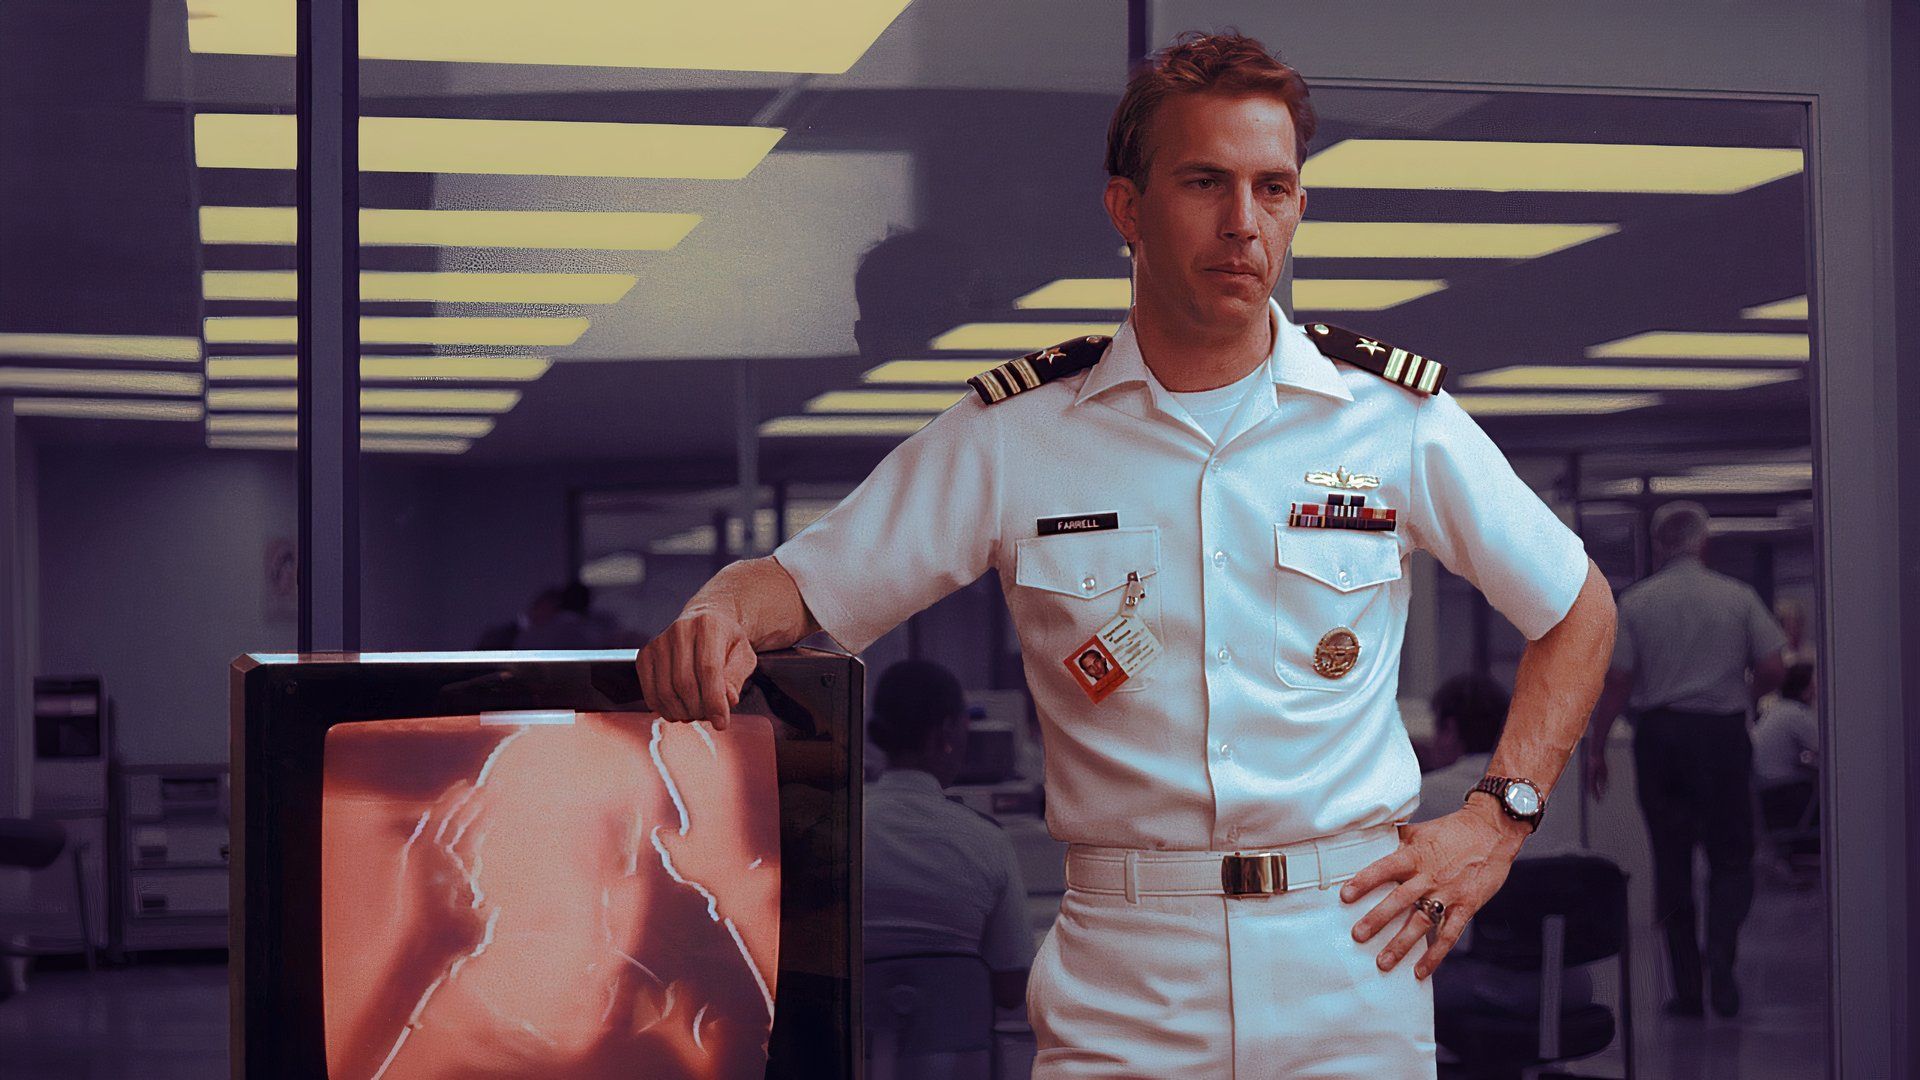 An edited image of Kevin Costner as Lt. Cmdr. Tom Farrel wearing a captain uniform next to a TV screen in No Way Out